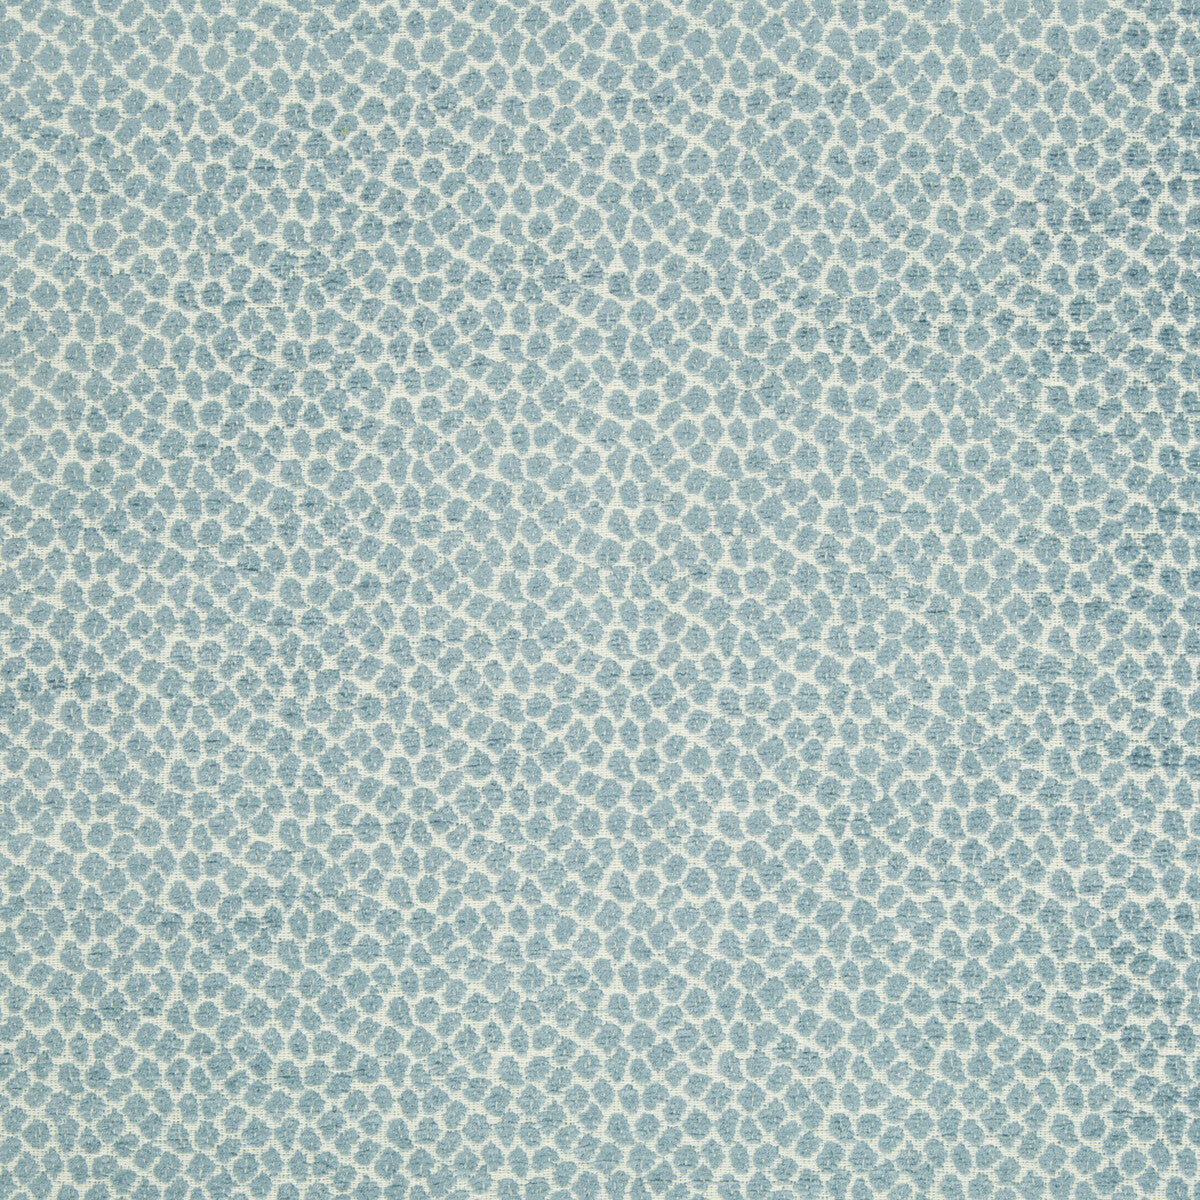 Kravet Contract fabric in 34745-52 color - pattern 34745.52.0 - by Kravet Contract in the Crypton Incase collection